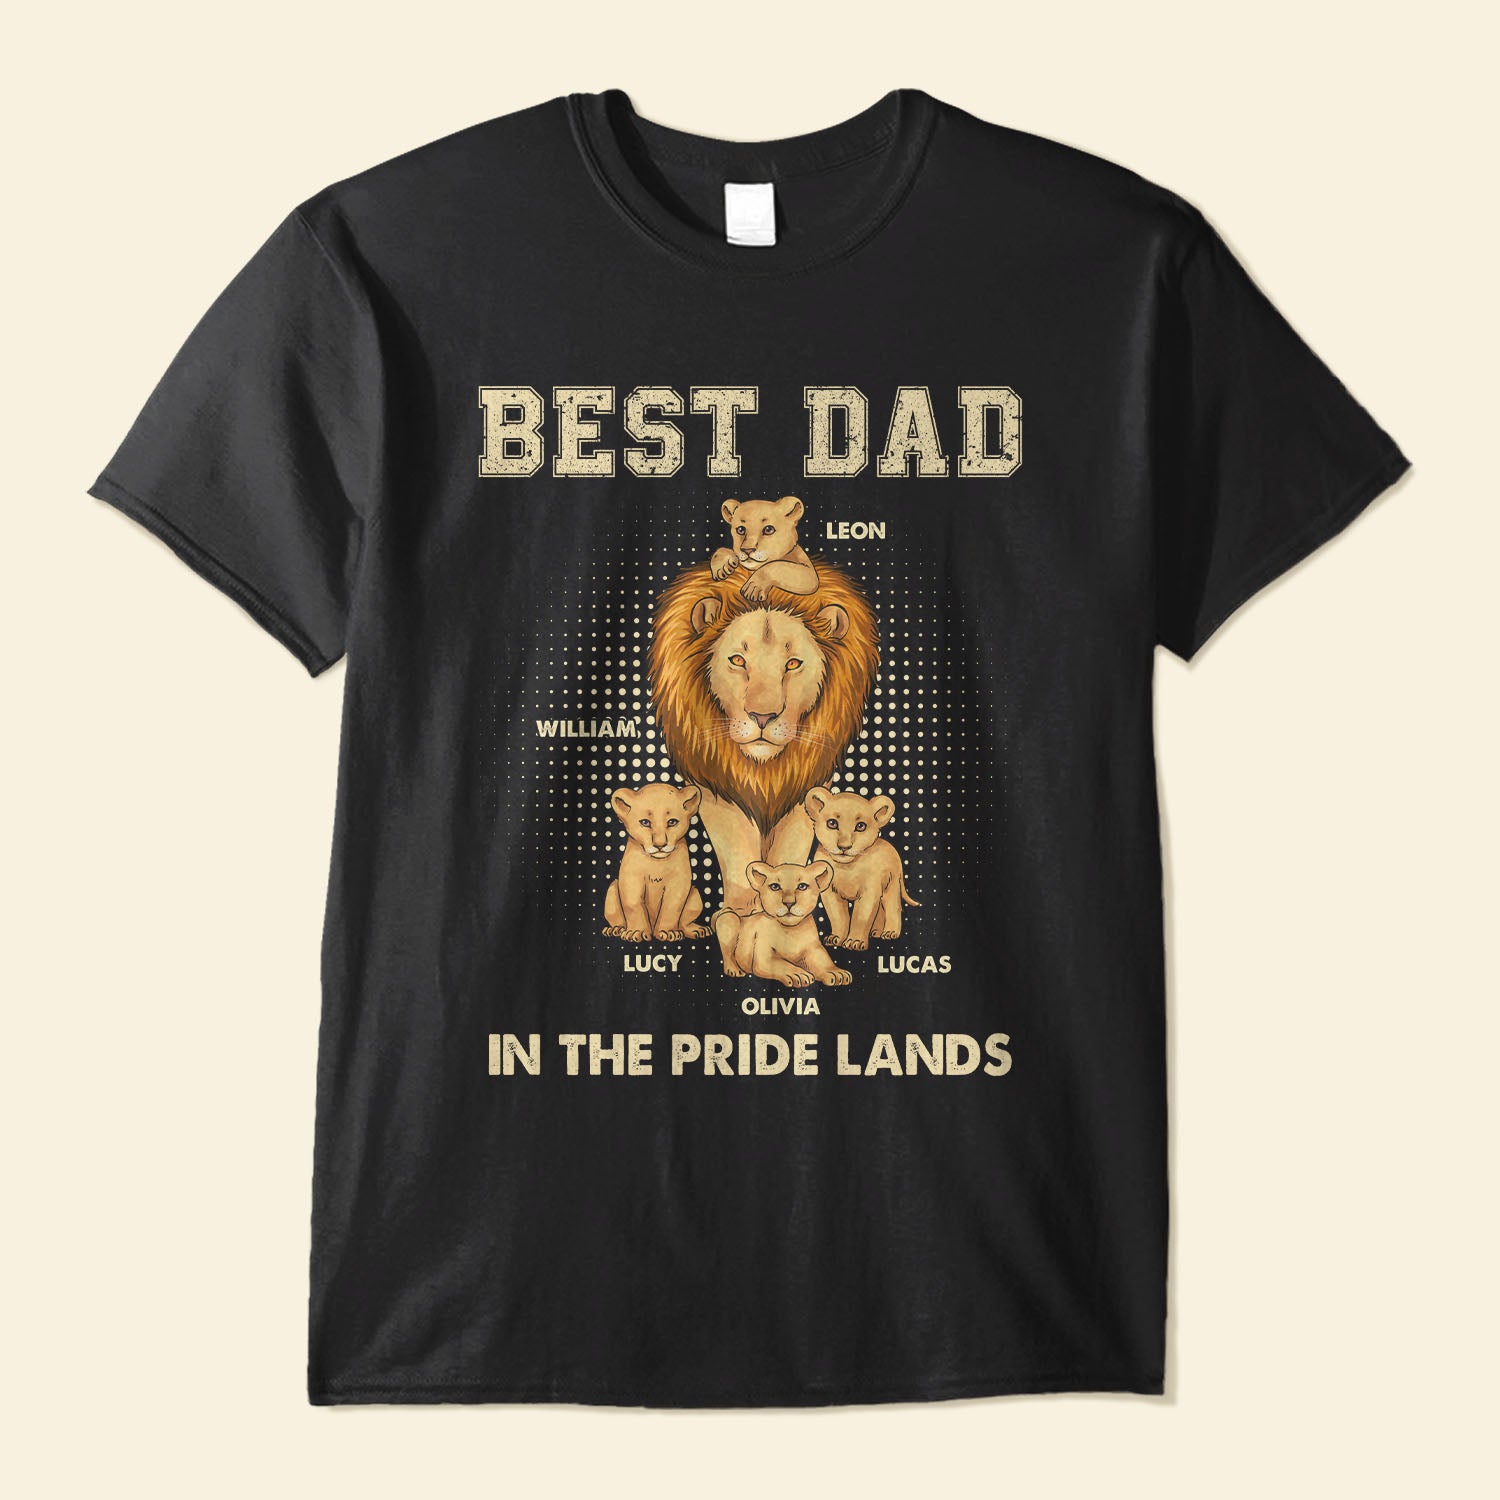 Best Dad In The Pride Lands - Personalized Shirt - Father's Day, Birthday Gift For Father, Dad, Papa